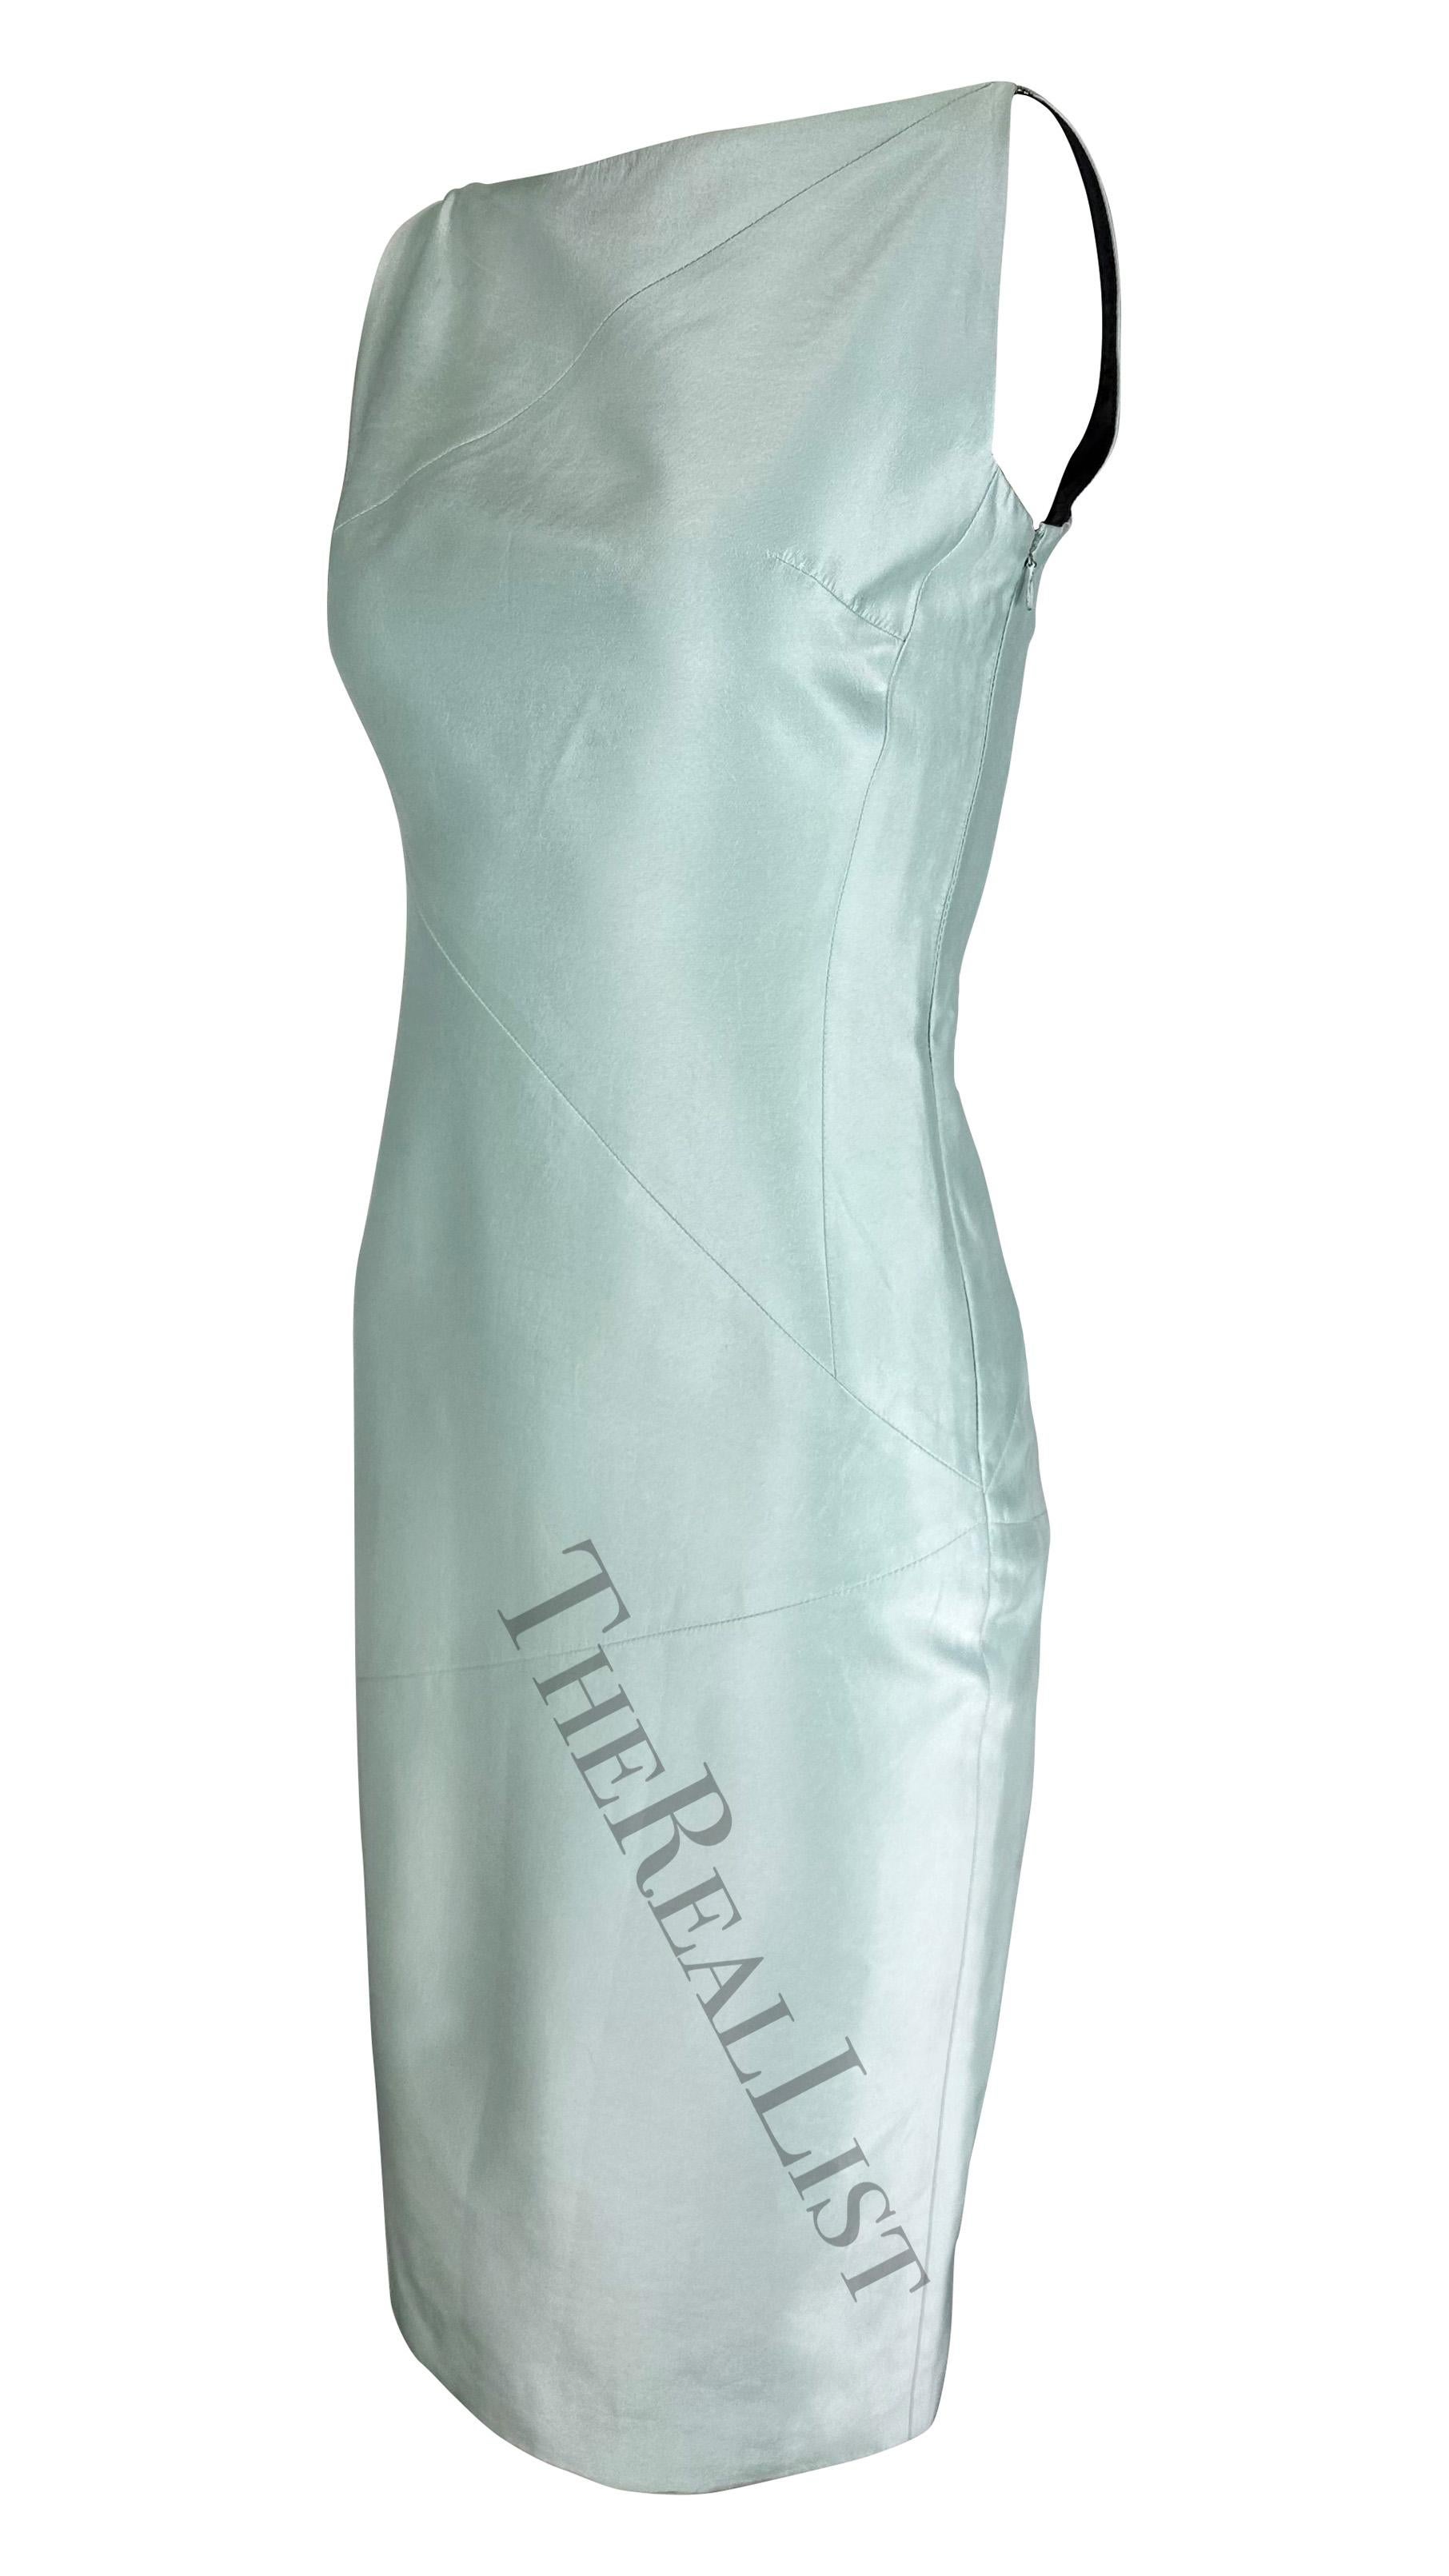 Women's S/S 1998 Gucci by Tom Ford Runway Ad Light Blue Silk Pencil Dress For Sale